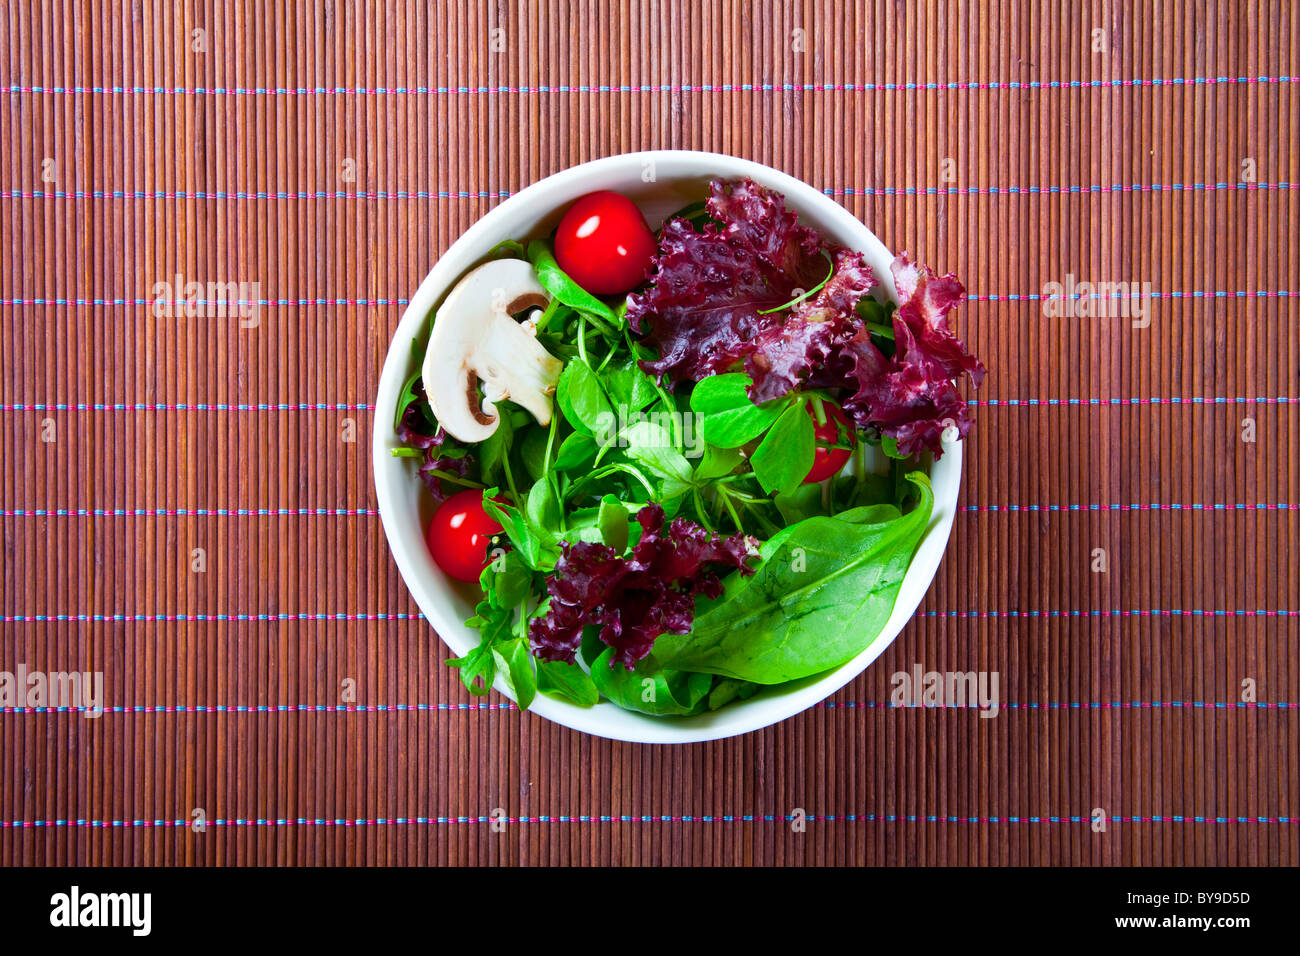 Fresh salad made with organic ingredients Stock Photo